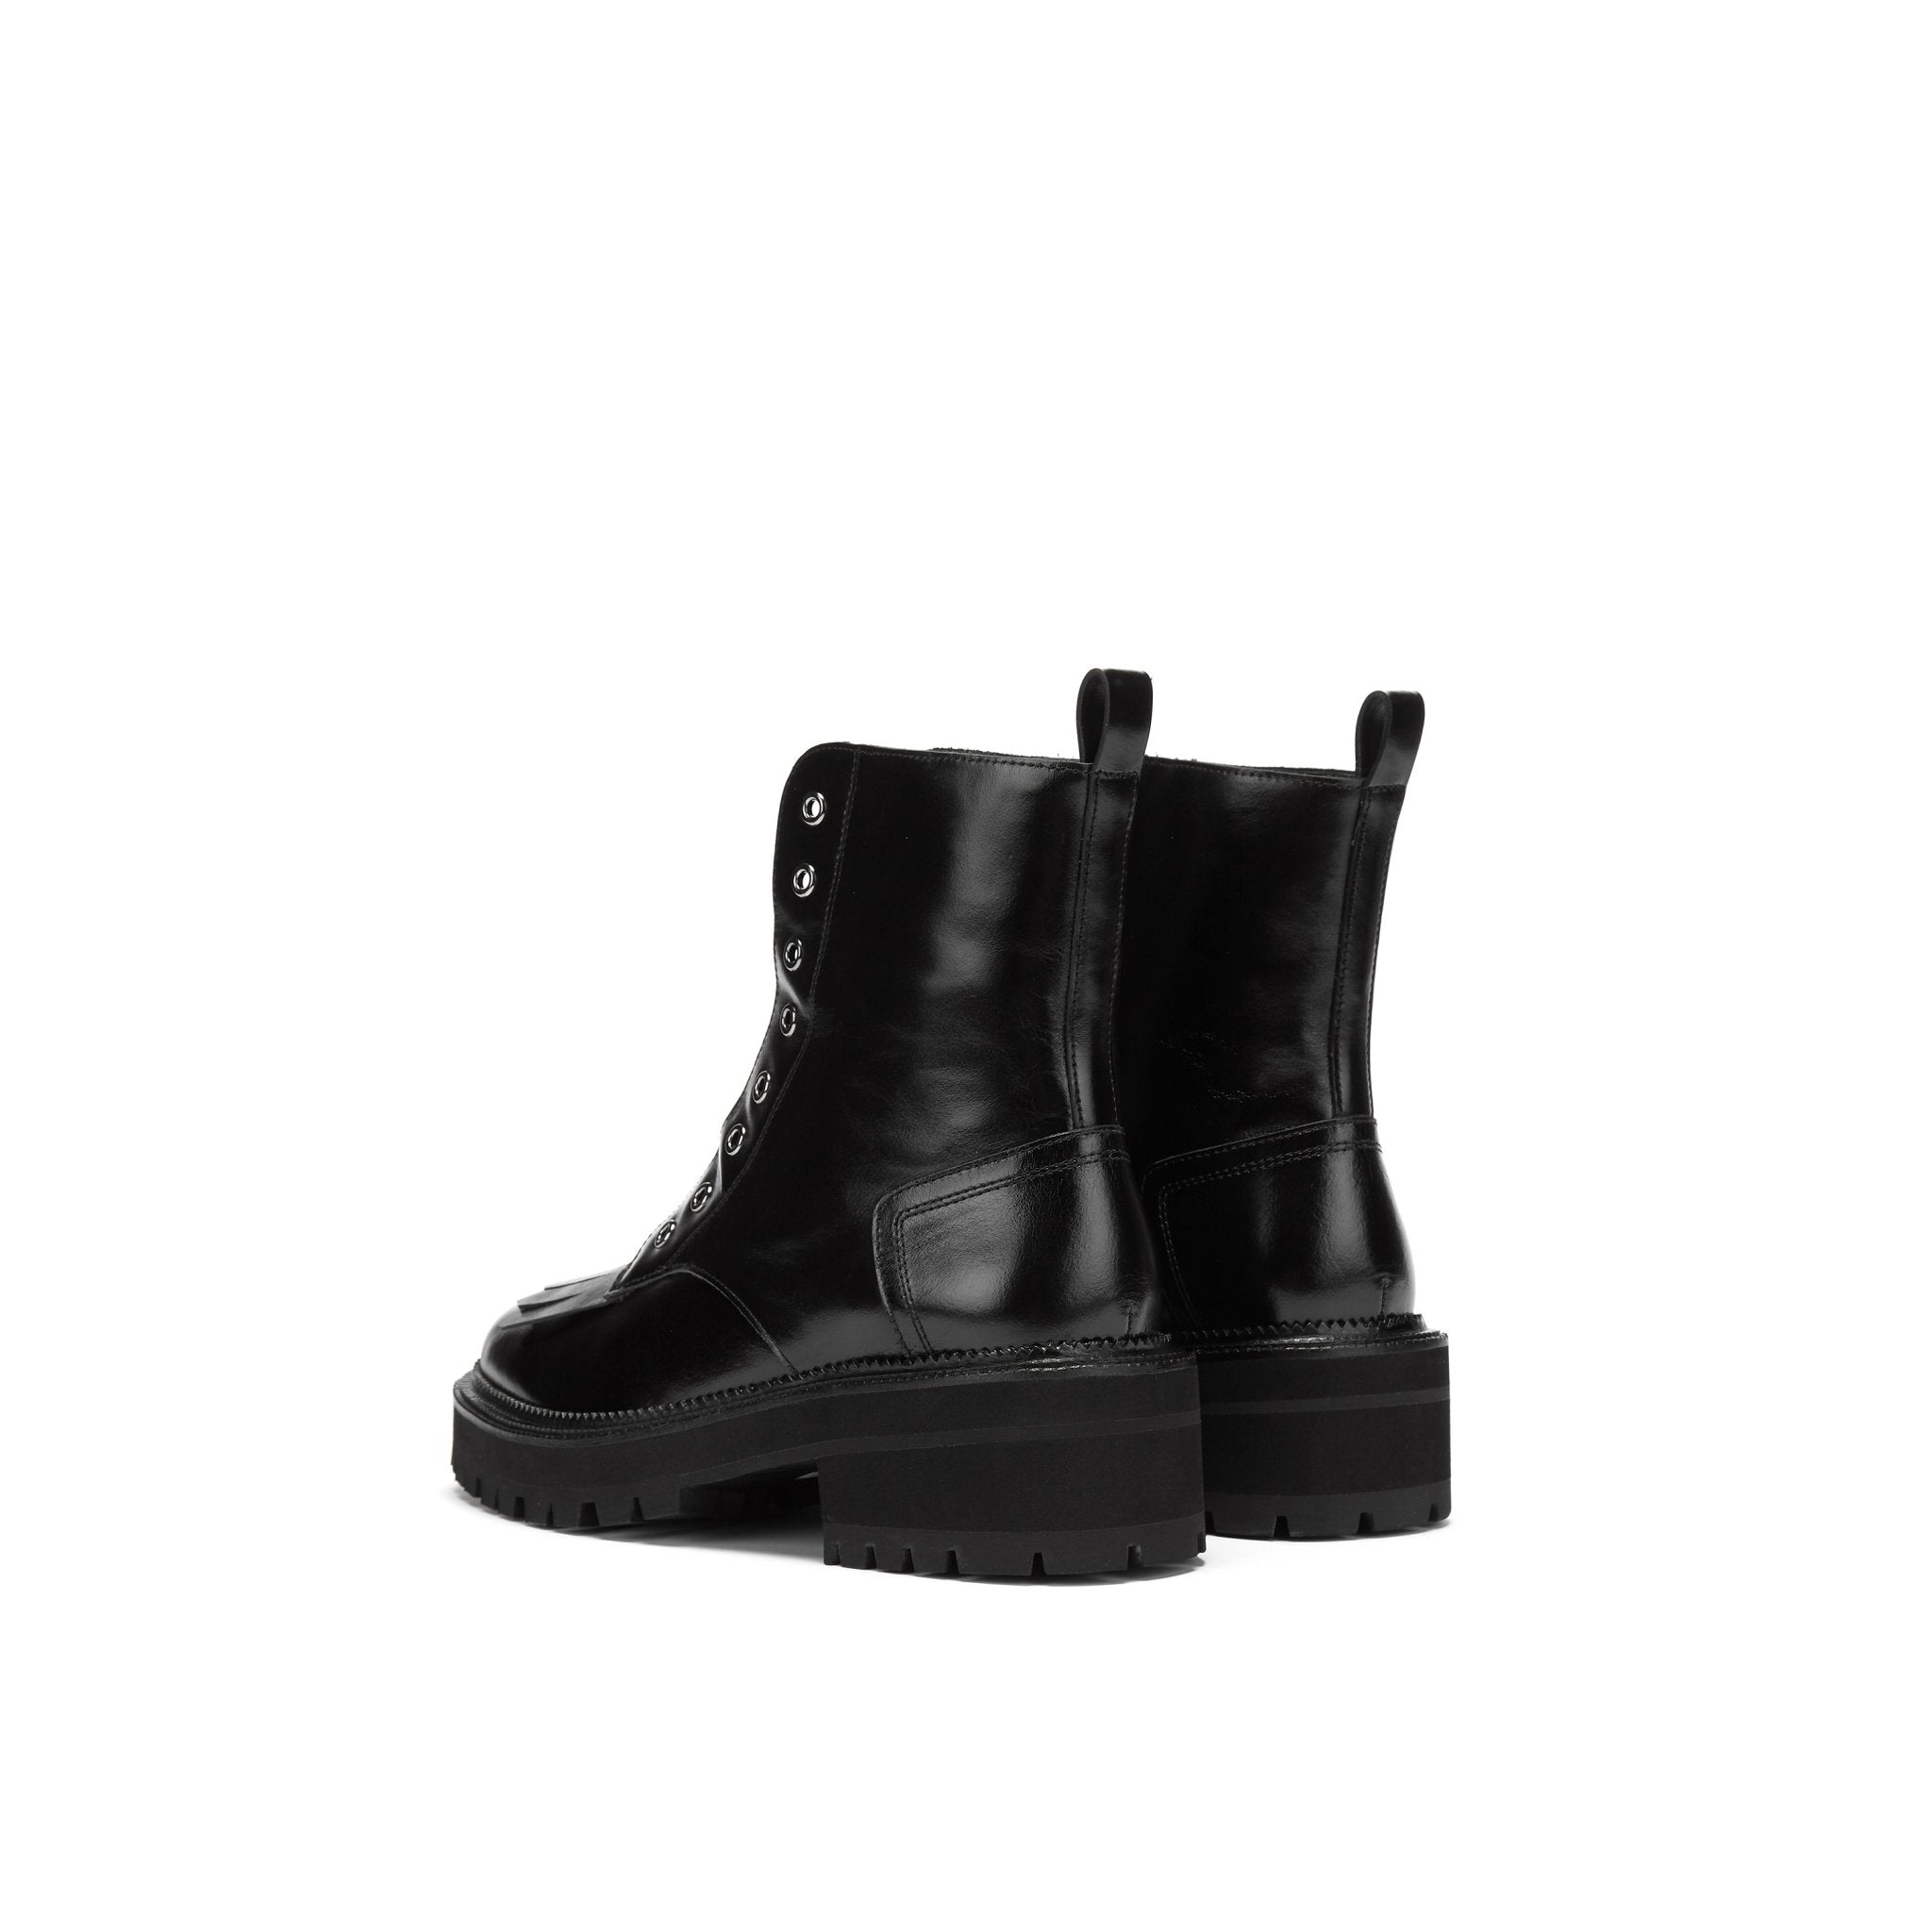 LOST IN ECHO Black Fringe Martin Boots | MADA IN CHINA